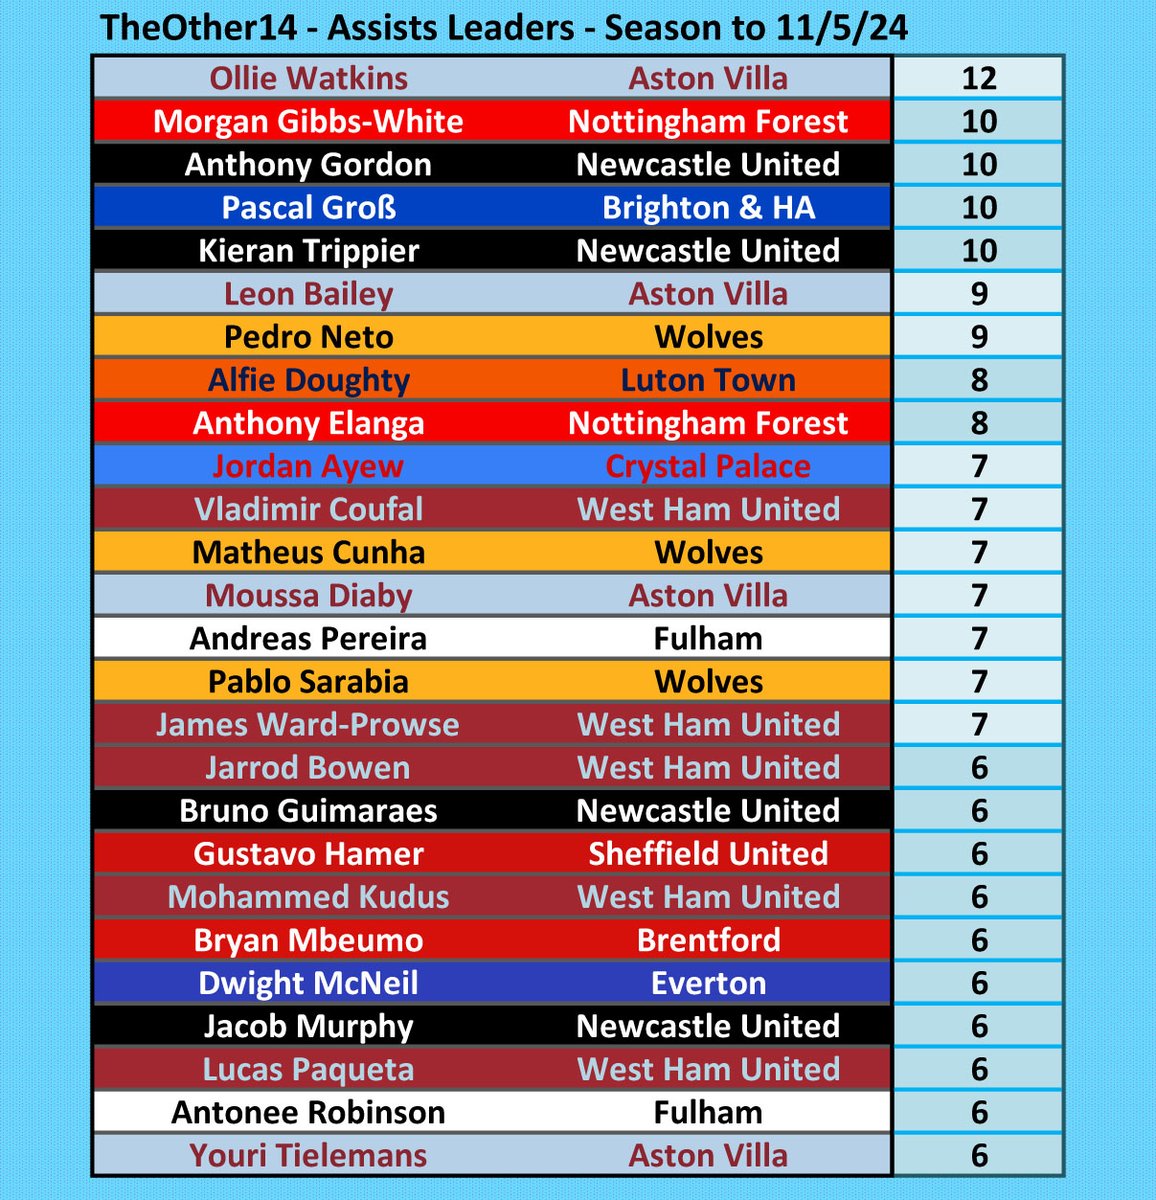 Assists Leaders from TheOther14 after #NFOCHE. @Other14The @Morgangibbs27 joins the pack on 10 behind Ollie Watkins. #AVFC #NFFC #NUFC #BHAFC #Wolves #LTFC #CPFC #WHUFC #FFC #twitterblades #BrentfordFC #EFC